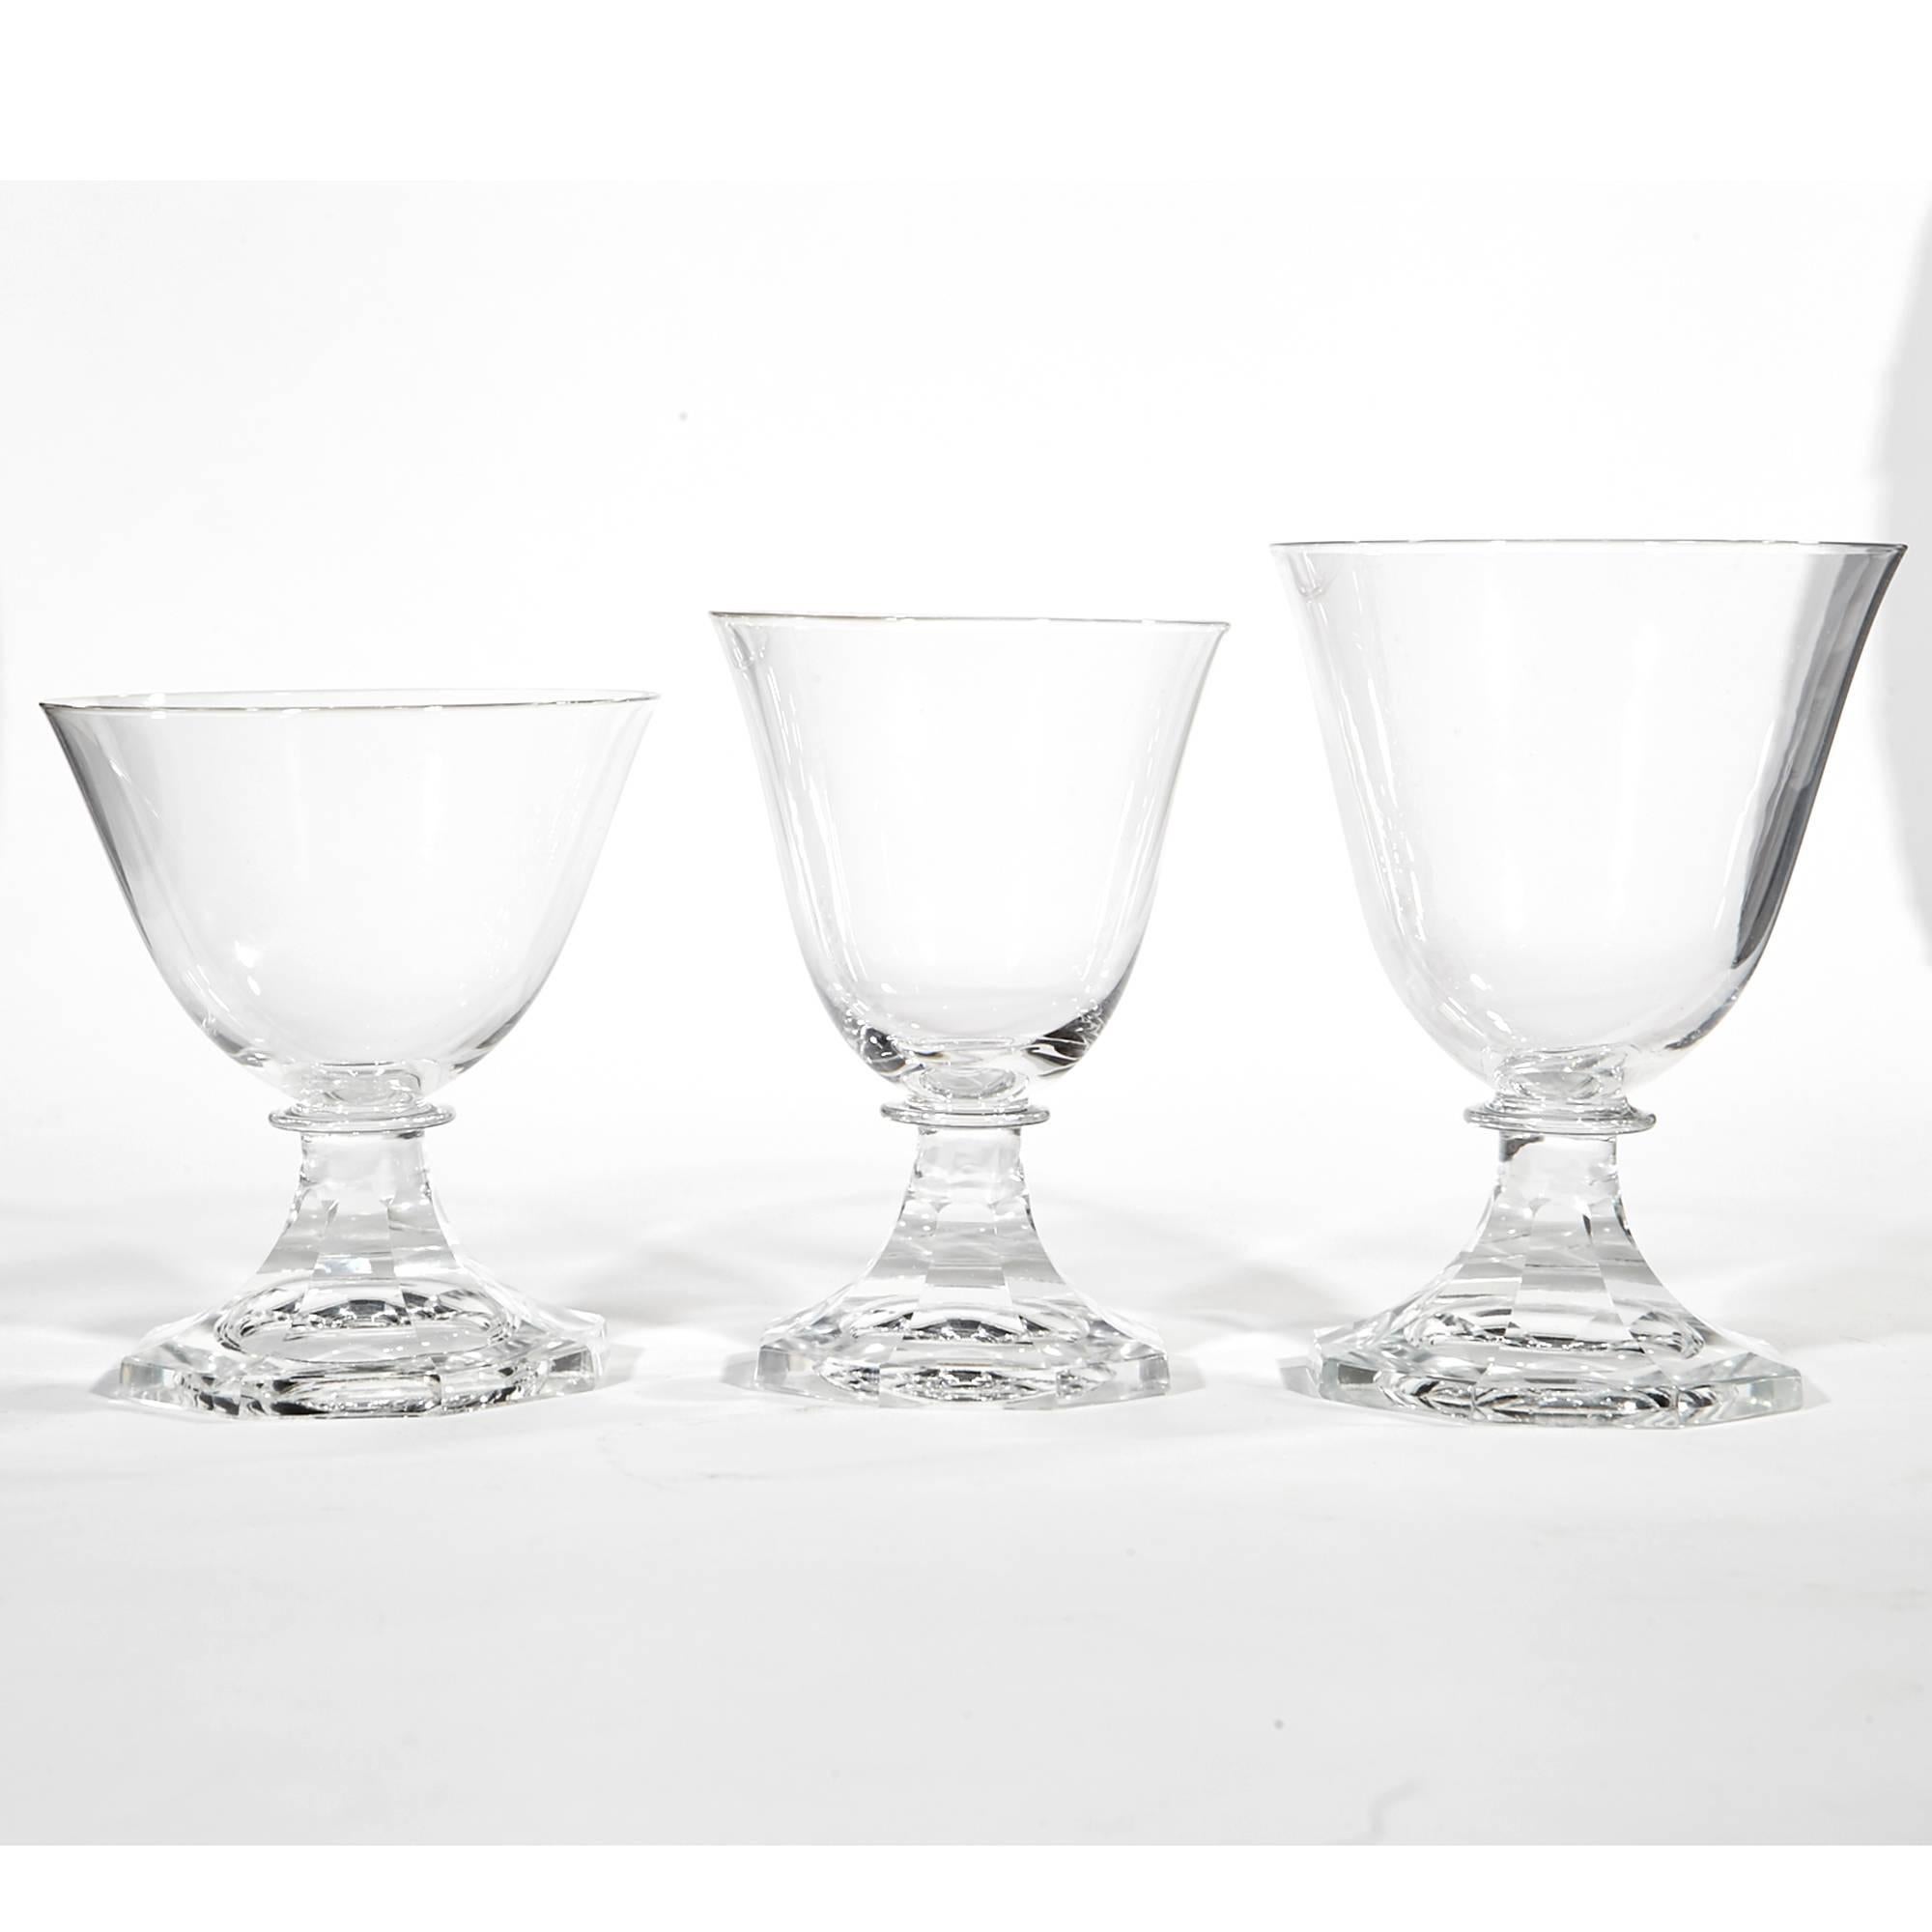 Set of 45 Swedish hand-cut crystal stems in the Seaford pattern by Orrefors, circa 1950.
Measures: Eight wines 3.5in.D x 5in.H
Ten low coupes 3.5in.D x 4in.H
Seven small wines 3in.D x 4.5in.H
Six liquor coupes 2.75in.D x 3.25in.H
Six small